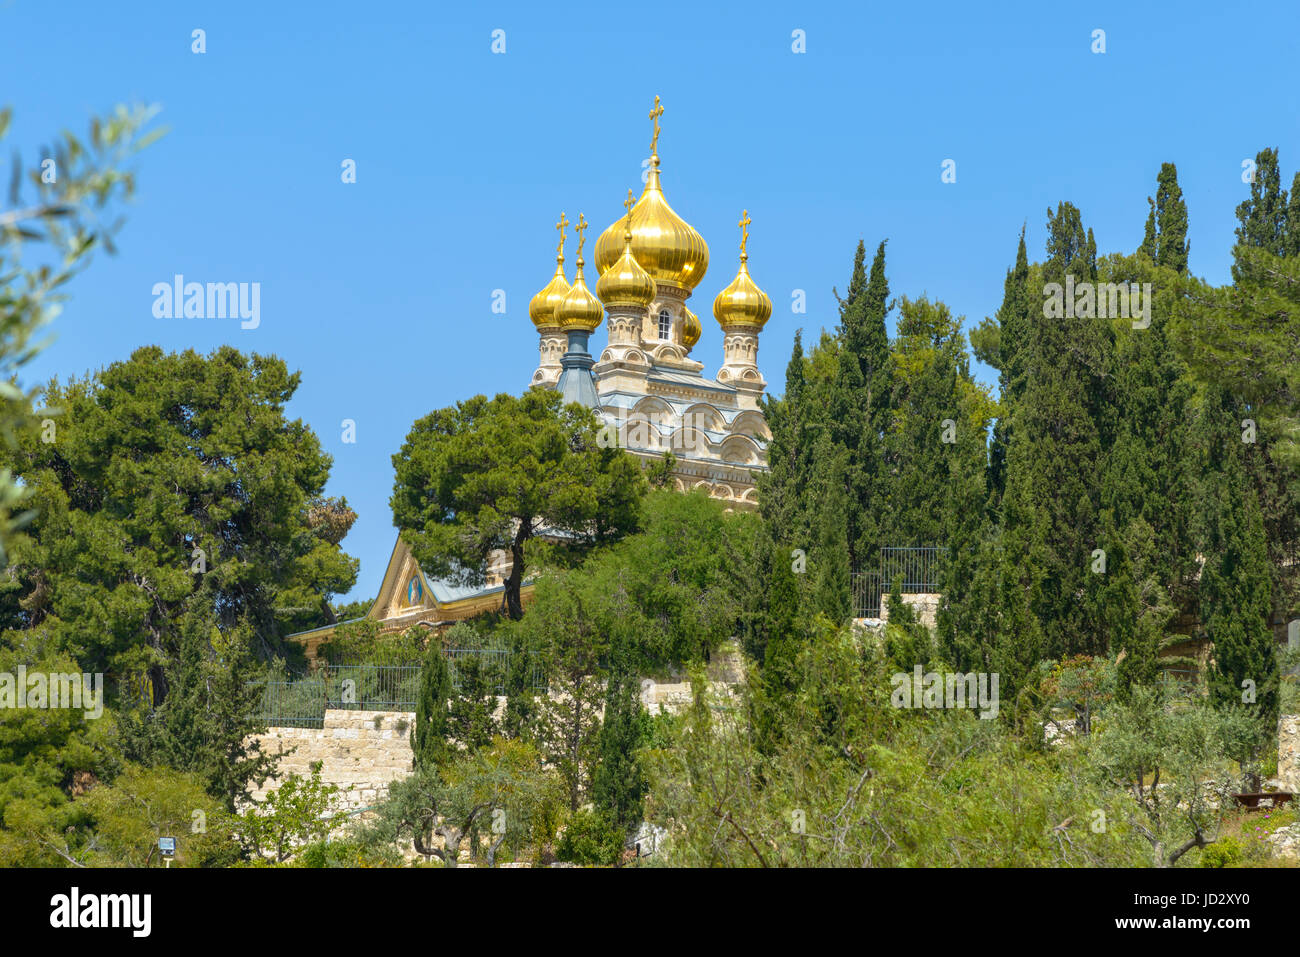 Russian Orthodox Church of Mary Magdalene at the Mount of Olives in Jerusalem, Israel Stock Photo